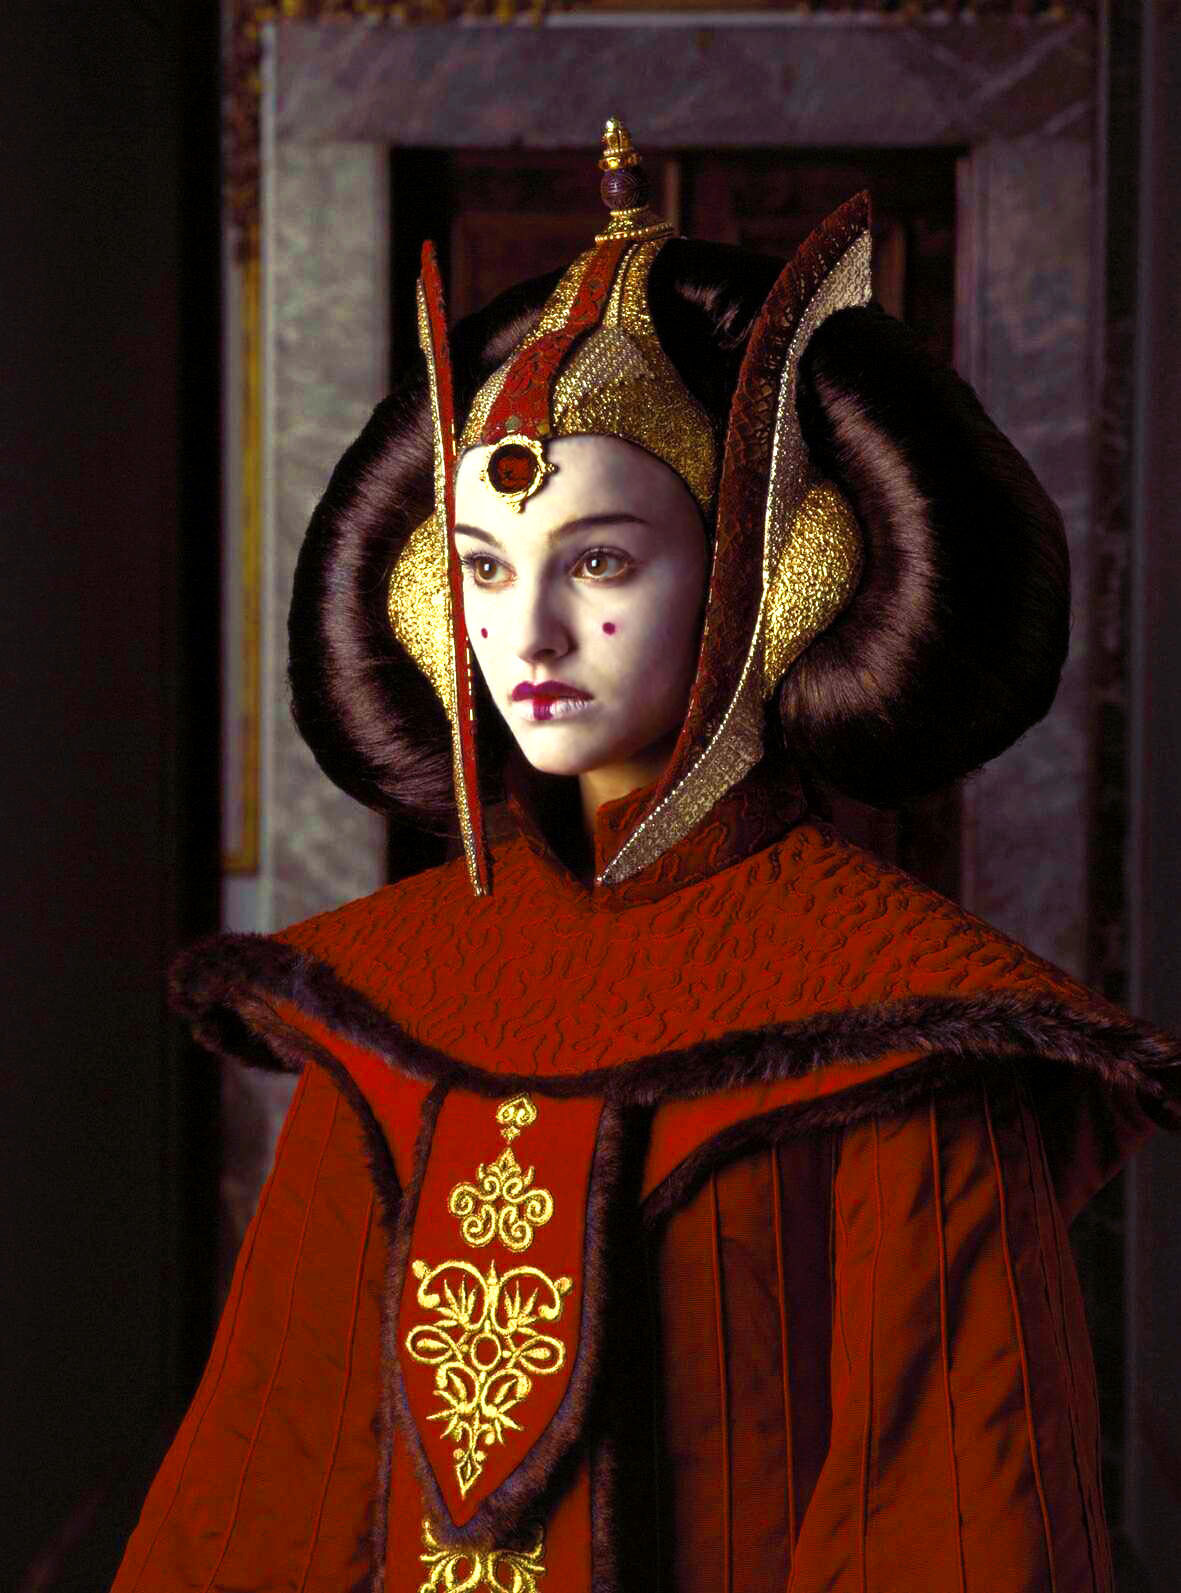 Star Wars: Fit for a Queen, Queen Amidalaâ€™s Throne Room Gown